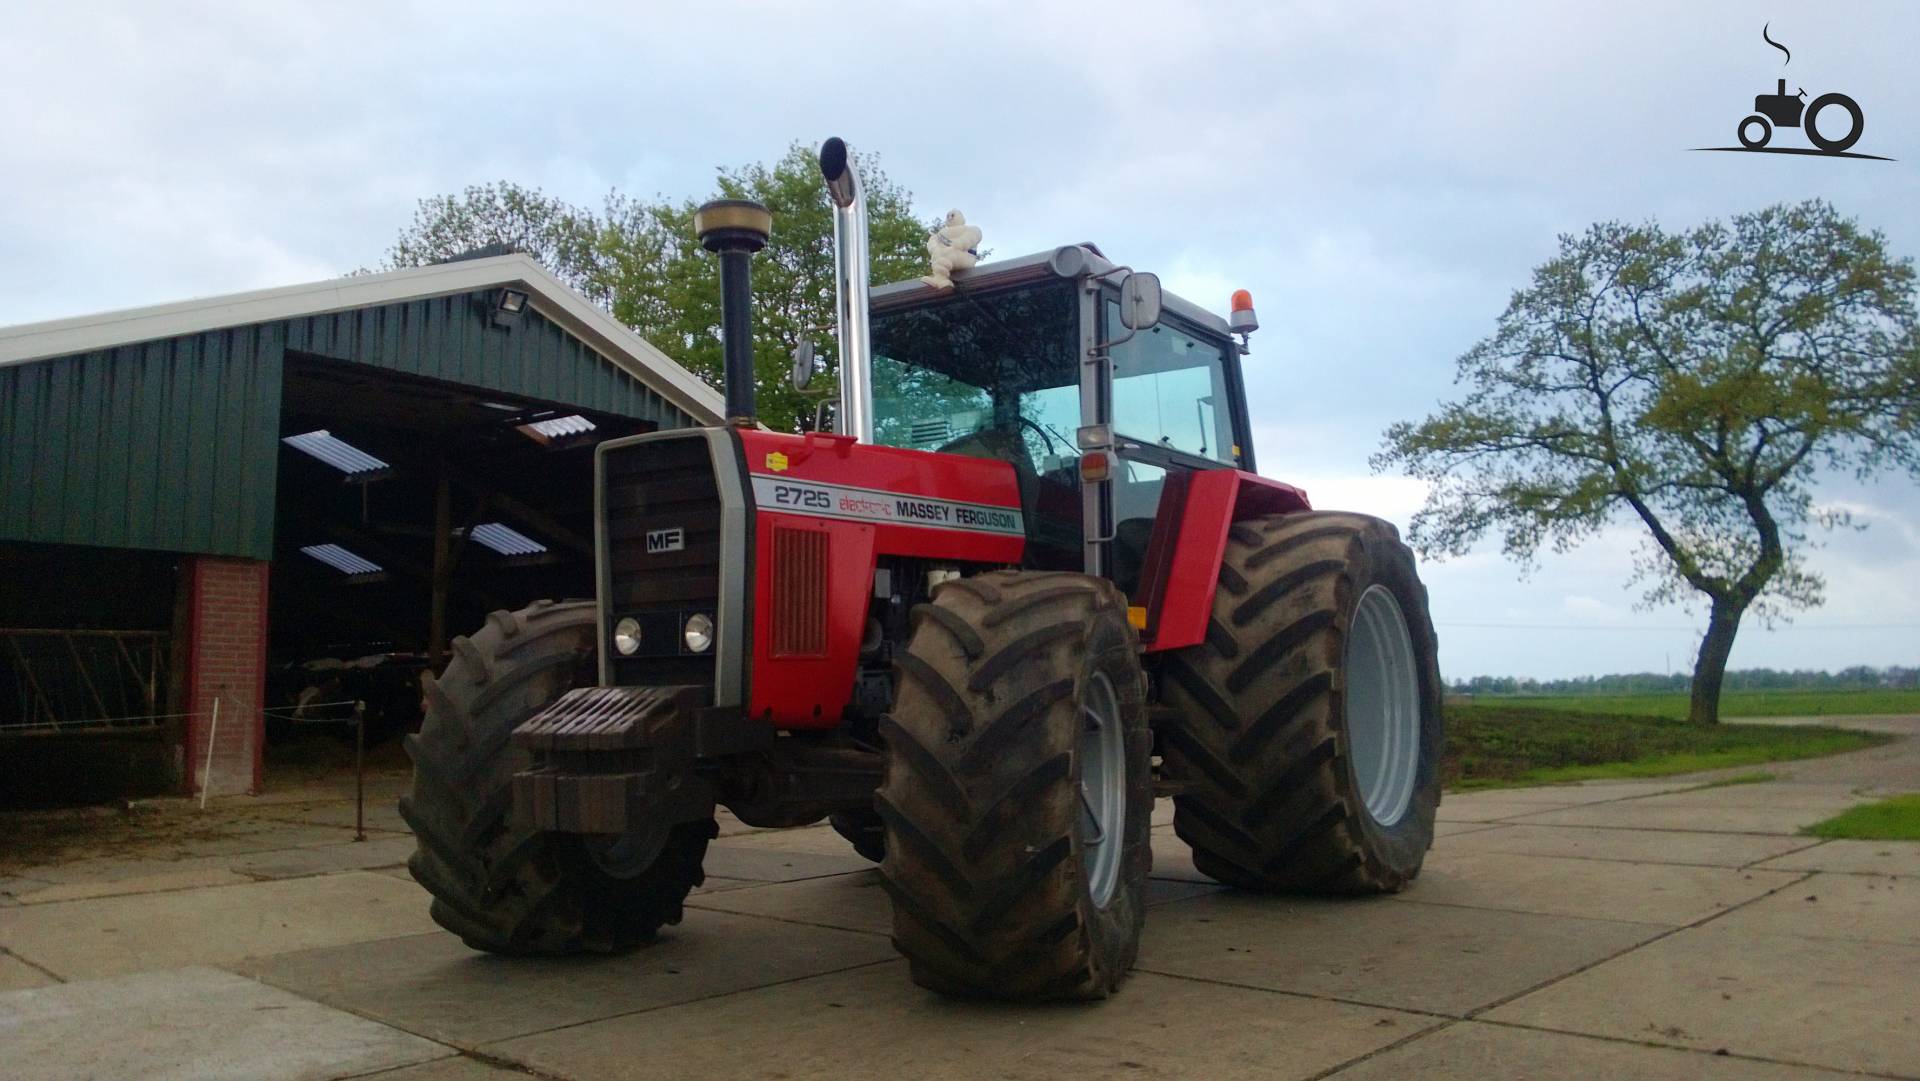 Massey Ferguson 2725 Specs and data - Everything about the Massey ...